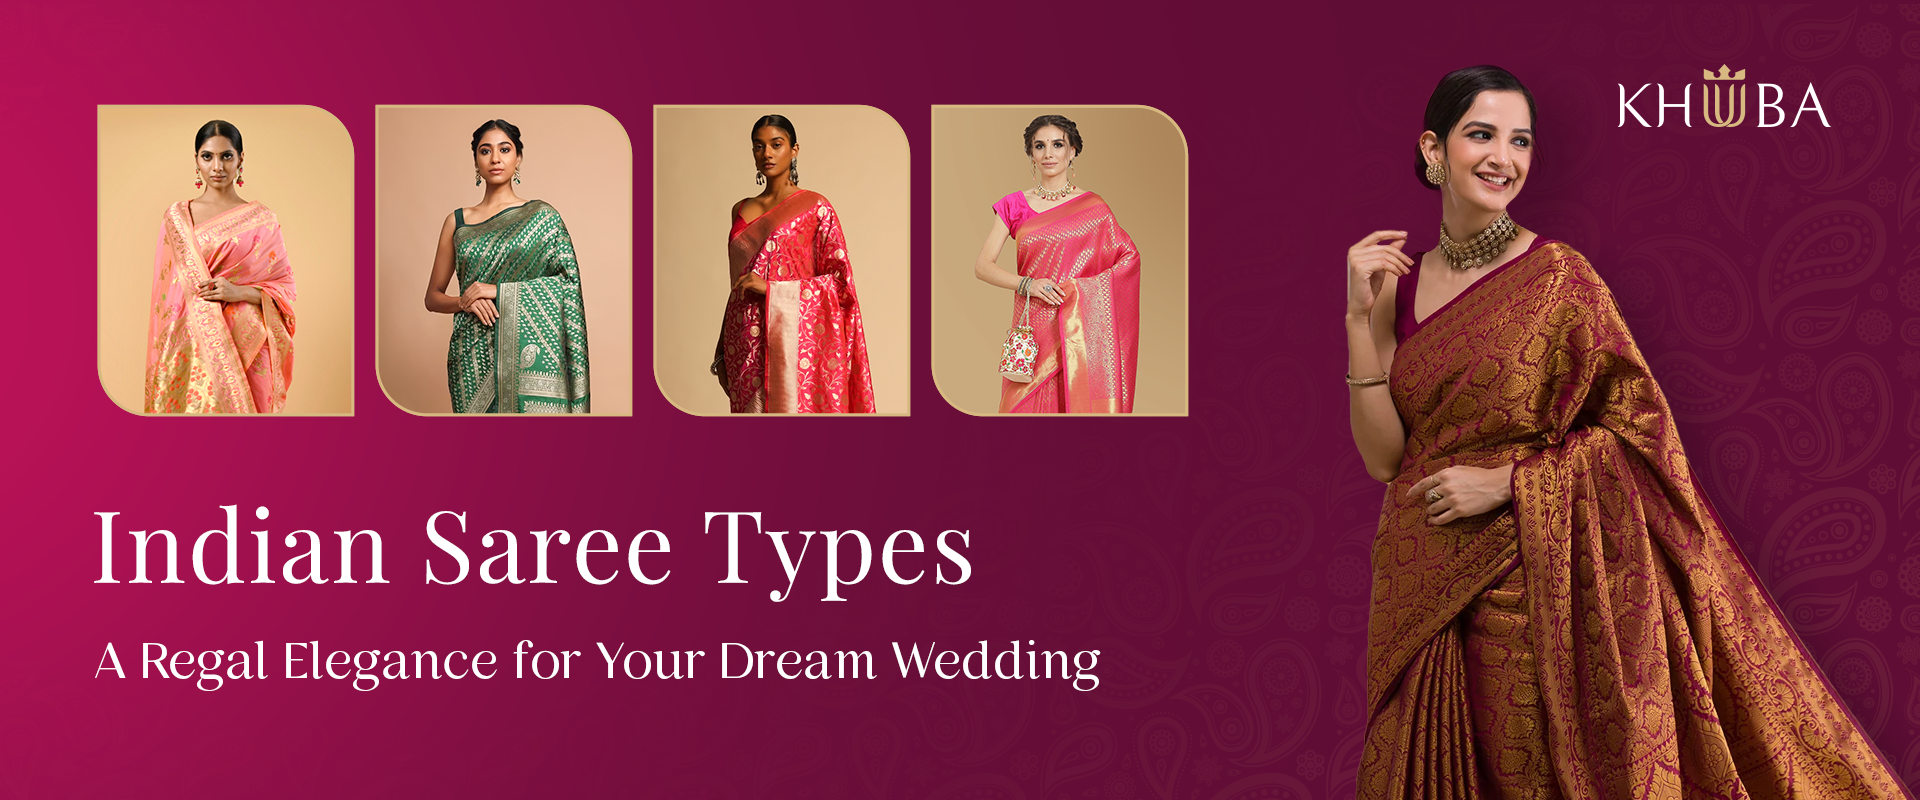 20 Indian Saree Types: A Regal Elegance for Your Dream Wedding